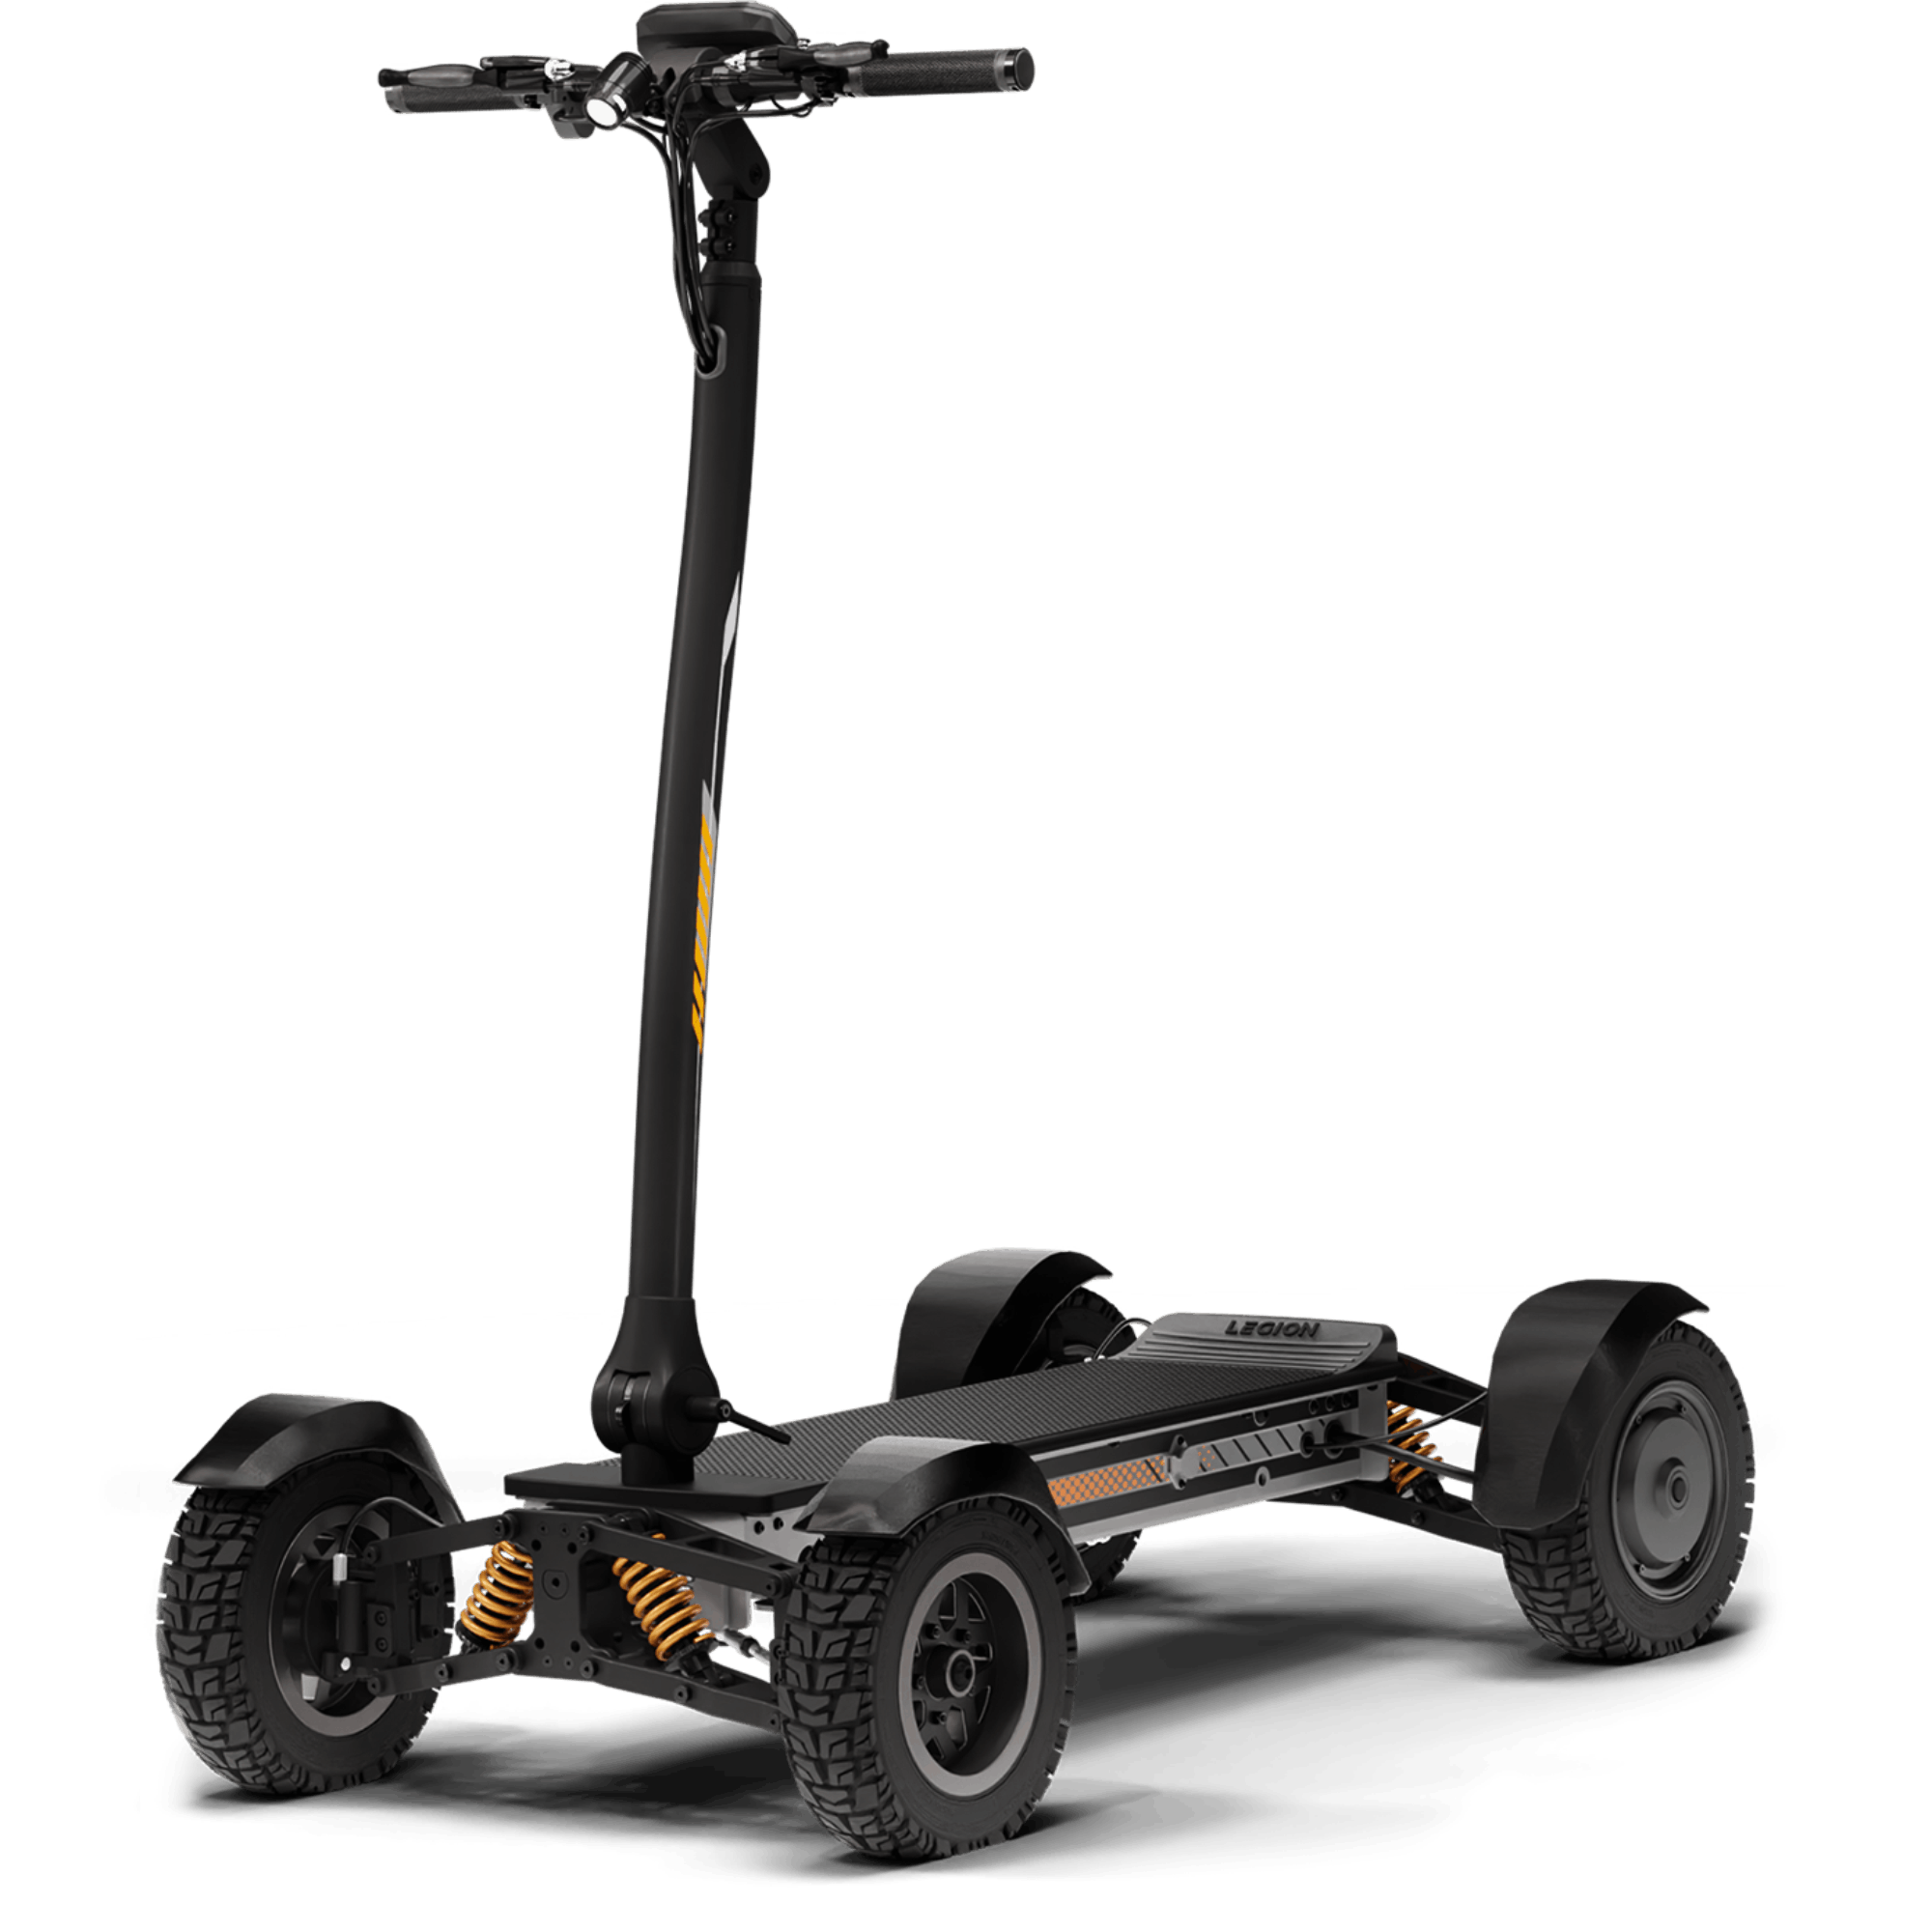 https://images.prismic.io/cycleboards/27b9eabc-2320-4849-bd9d-9247fa60e380_Legion-Electric-Motorsports-XQ-3000-Grey-Hero.png?auto=compress,format